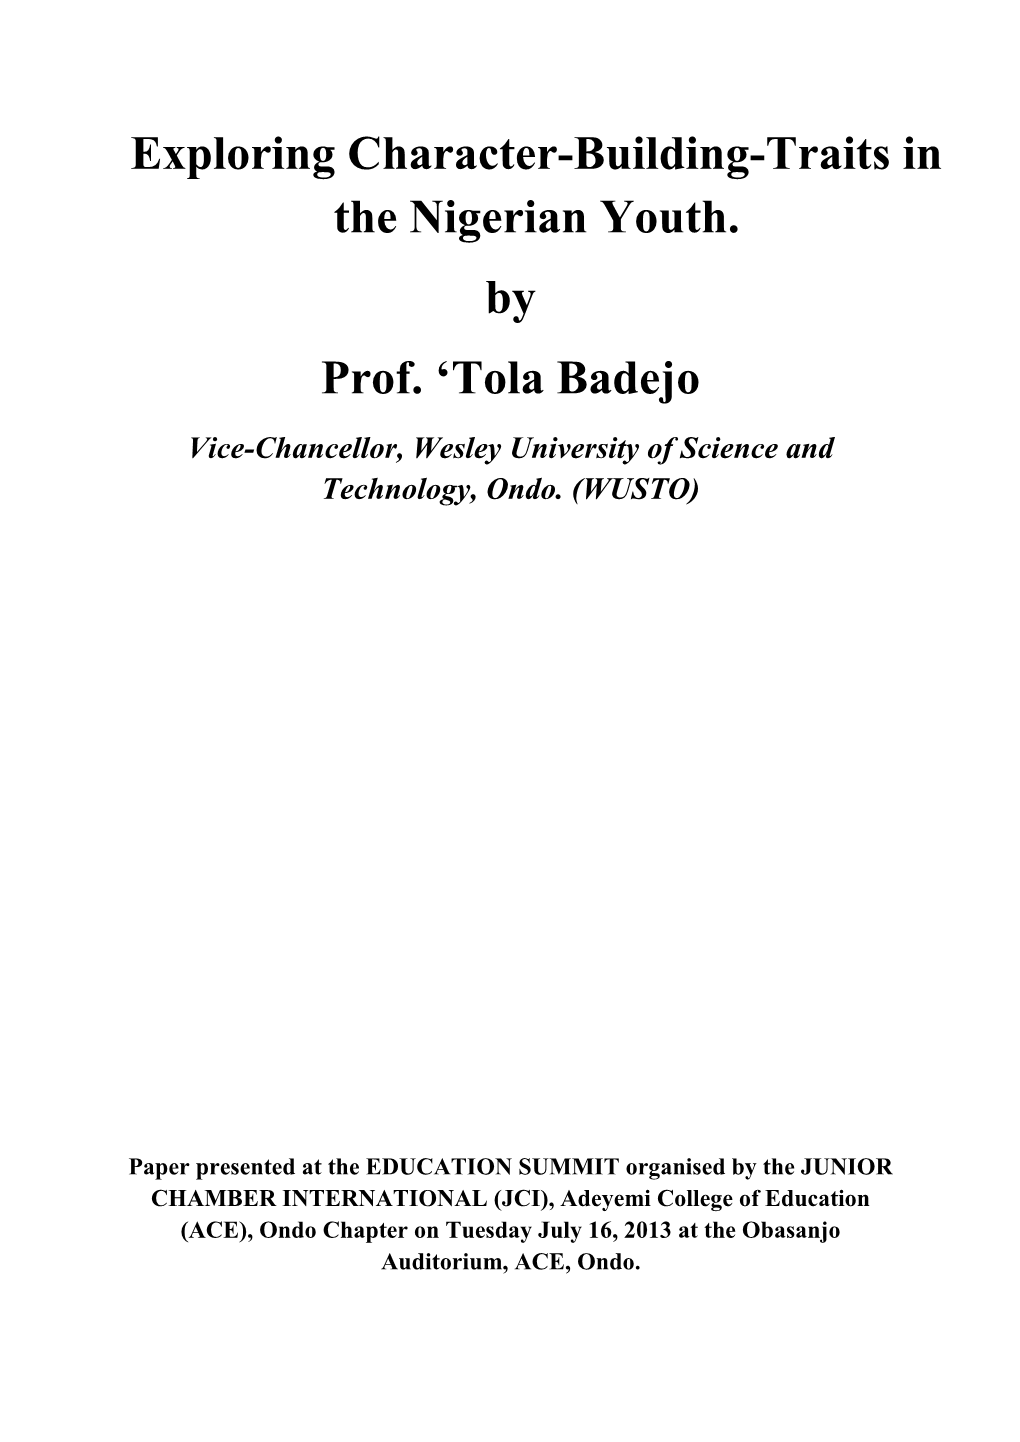 Exploring Character-Building-Traits in the Nigerian Youth. by Prof. 'Tola